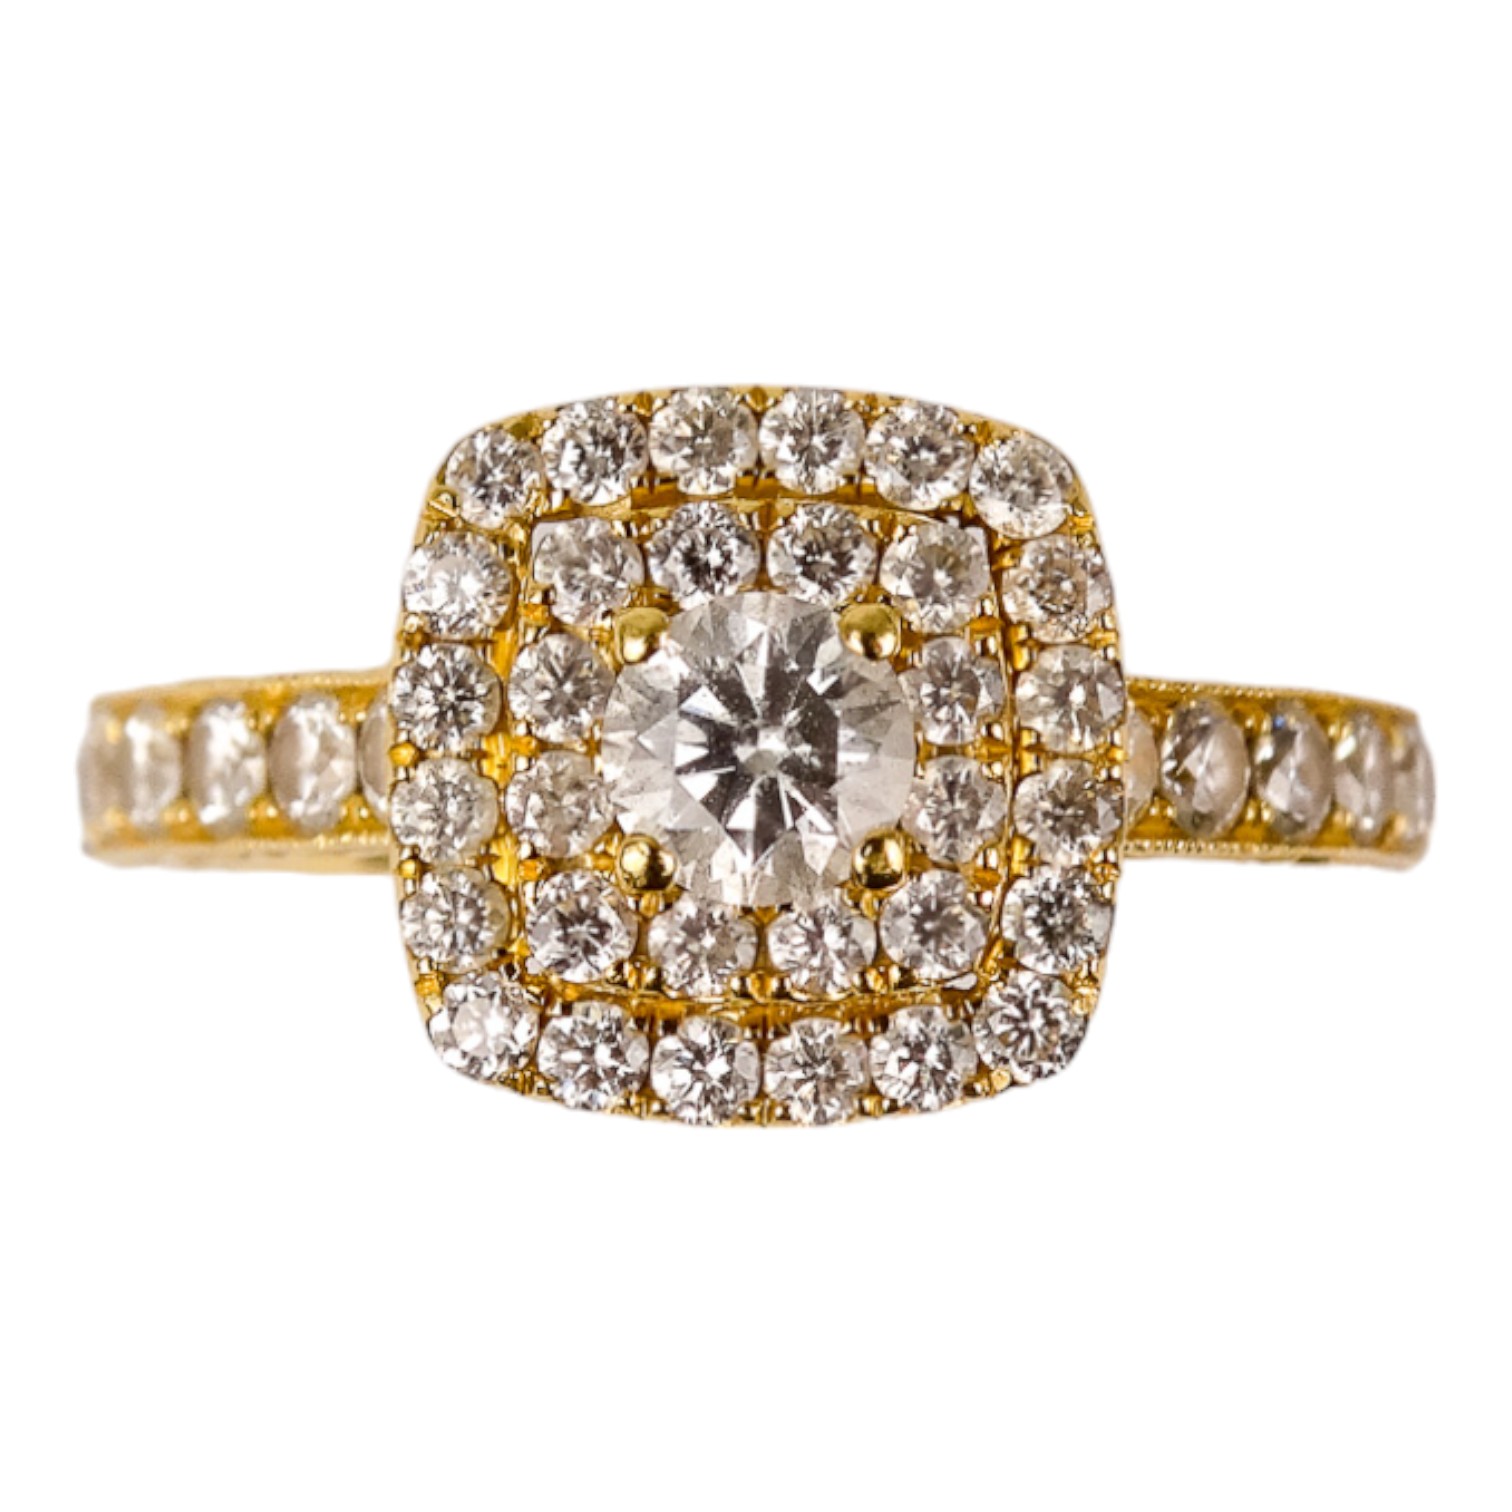 A Tiffany 18ct yellow gold and diamond ring - size L, weight 5.7g.